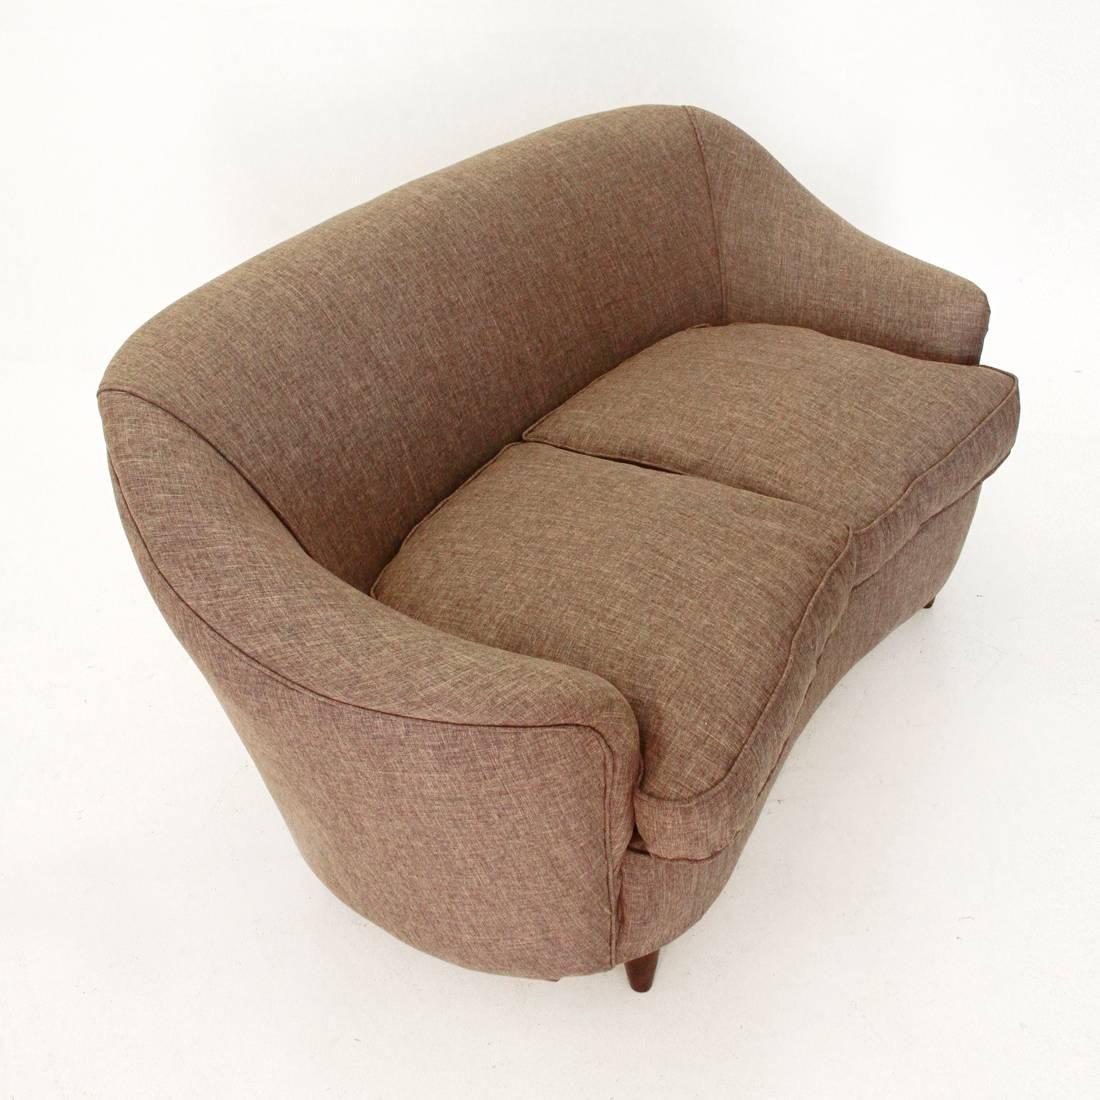 This two-seat sofa was made in Italy and features a curved structure, two cushions and wooden feet.